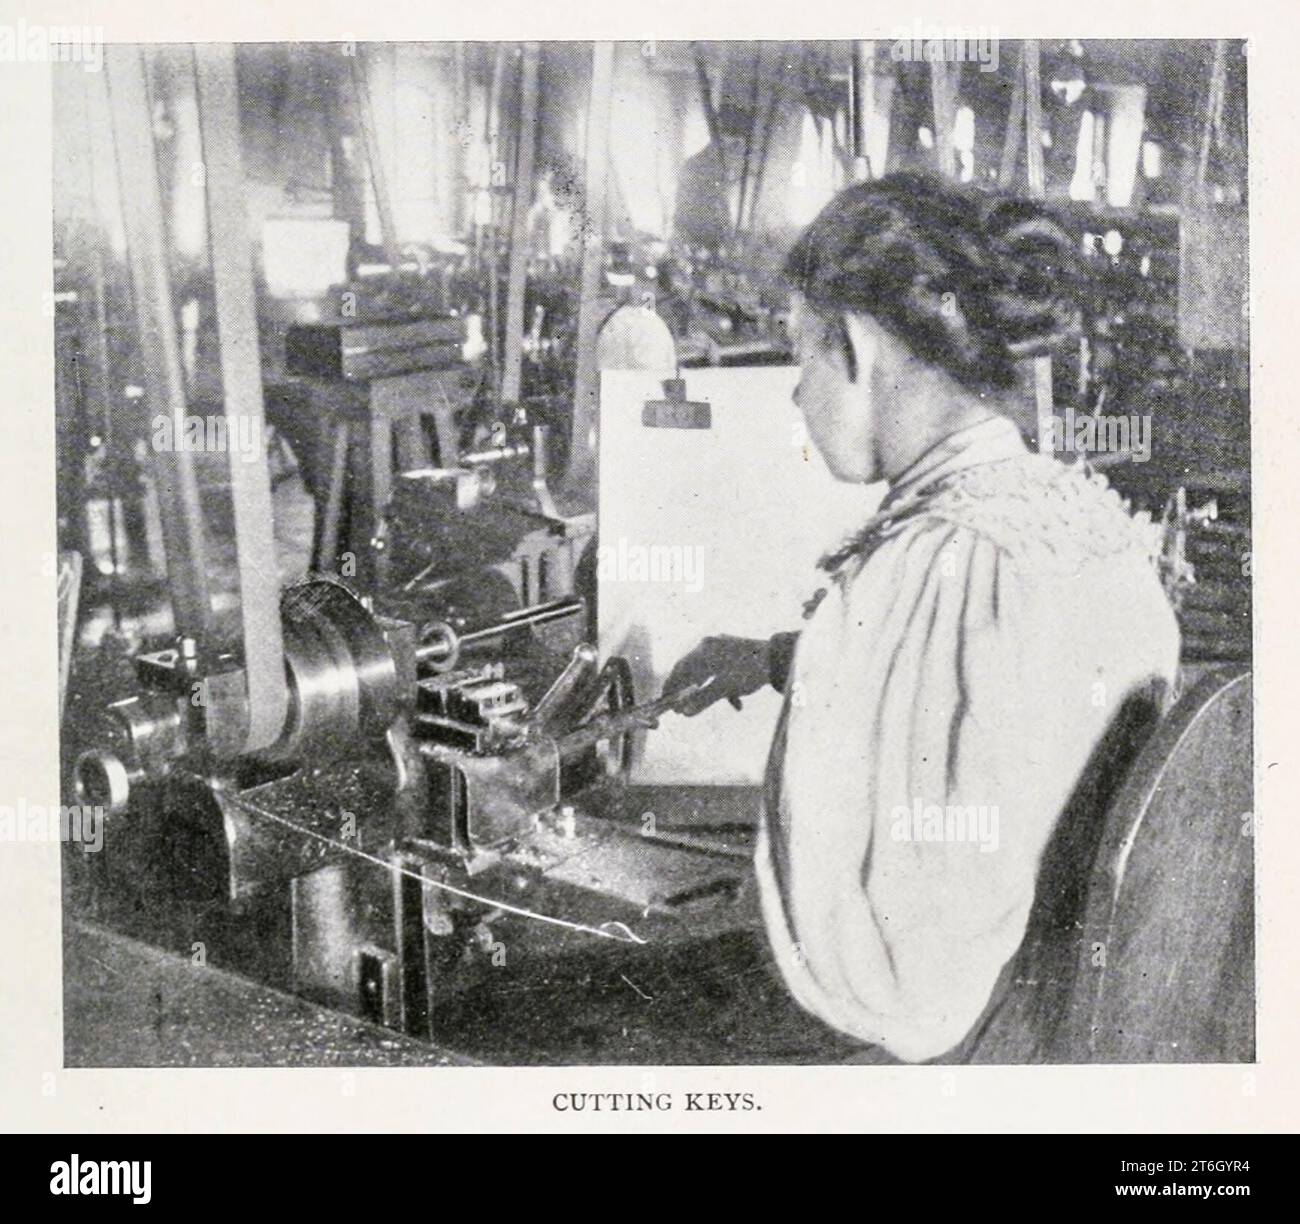 Cutting Keys The Yale & Towne Lock Manufacturing Company Shelbume Falls, Massachusetts from the Article SIX EXAMPLES OF SUCCESSFUL SHOP MANAGEMENT. Part III By Henry Roland. from The Engineering Magazine DEVOTED TO INDUSTRIAL PROGRESS Volume XII October 1896 to March 1897 The Engineering Magazine Co Stock Photo